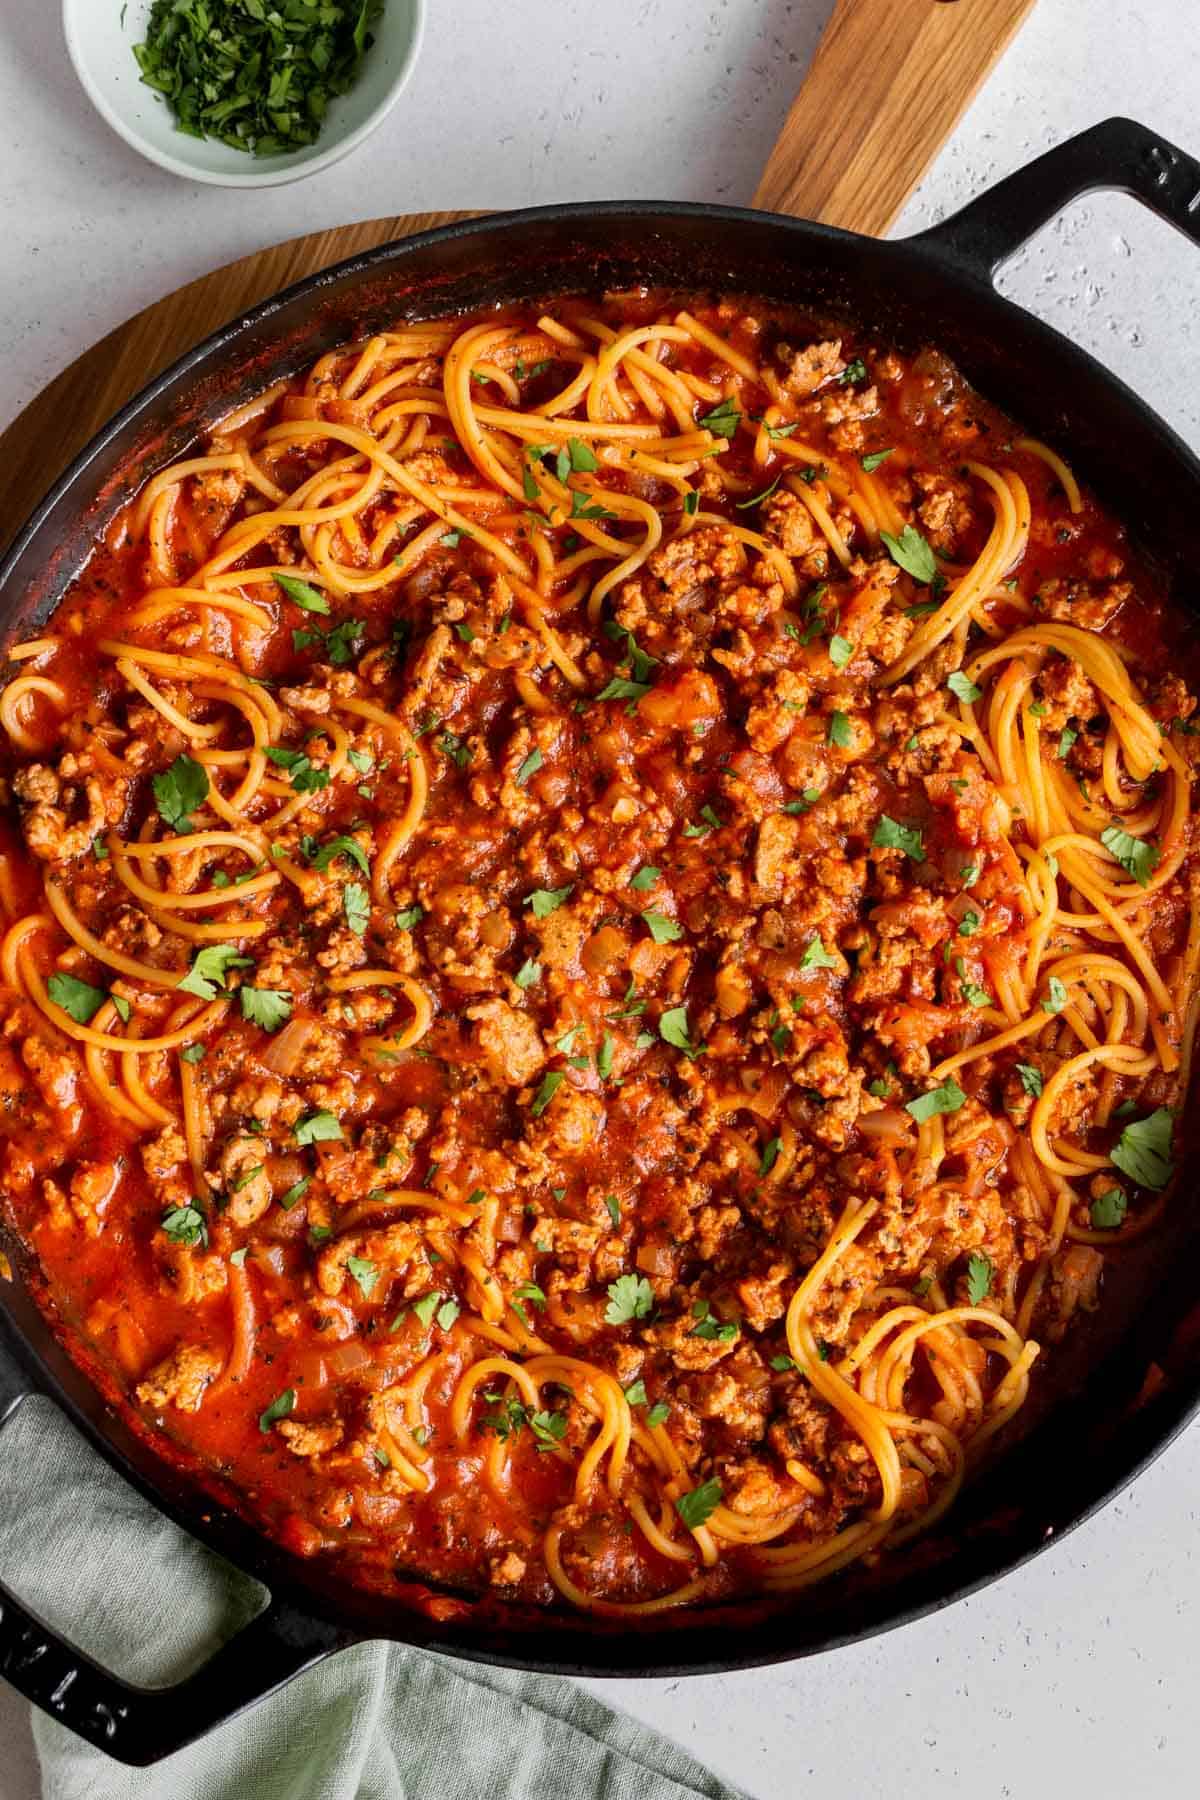 An overhead shot of a cast iron skillet filled with turkey spaghetti.